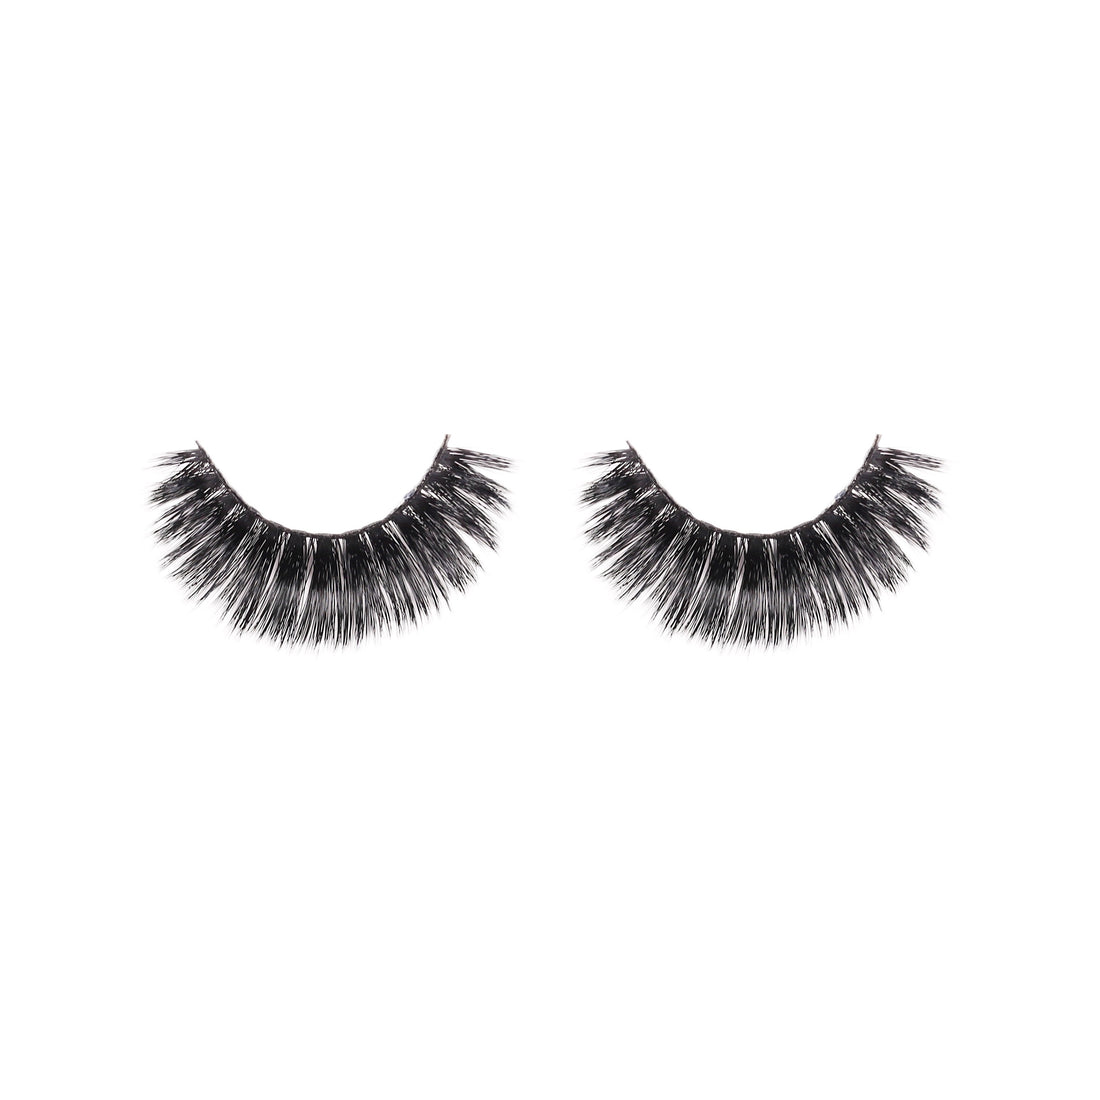 Do You Apply False Lashes To Your Skin Or Lashes?